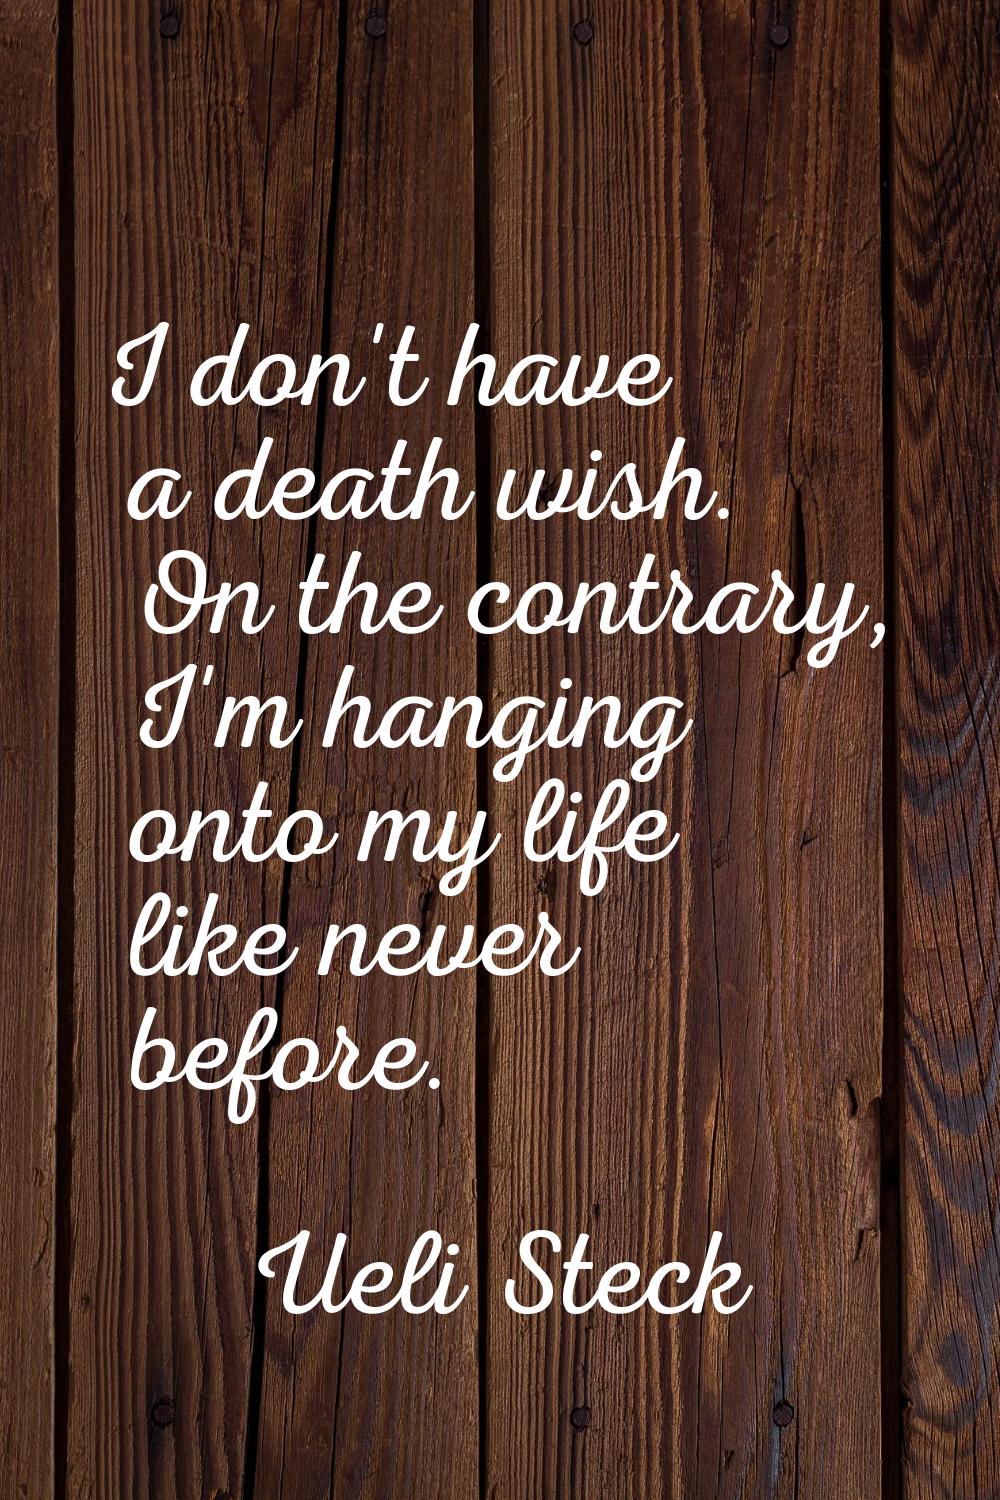 I don't have a death wish. On the contrary, I'm hanging onto my life like never before.